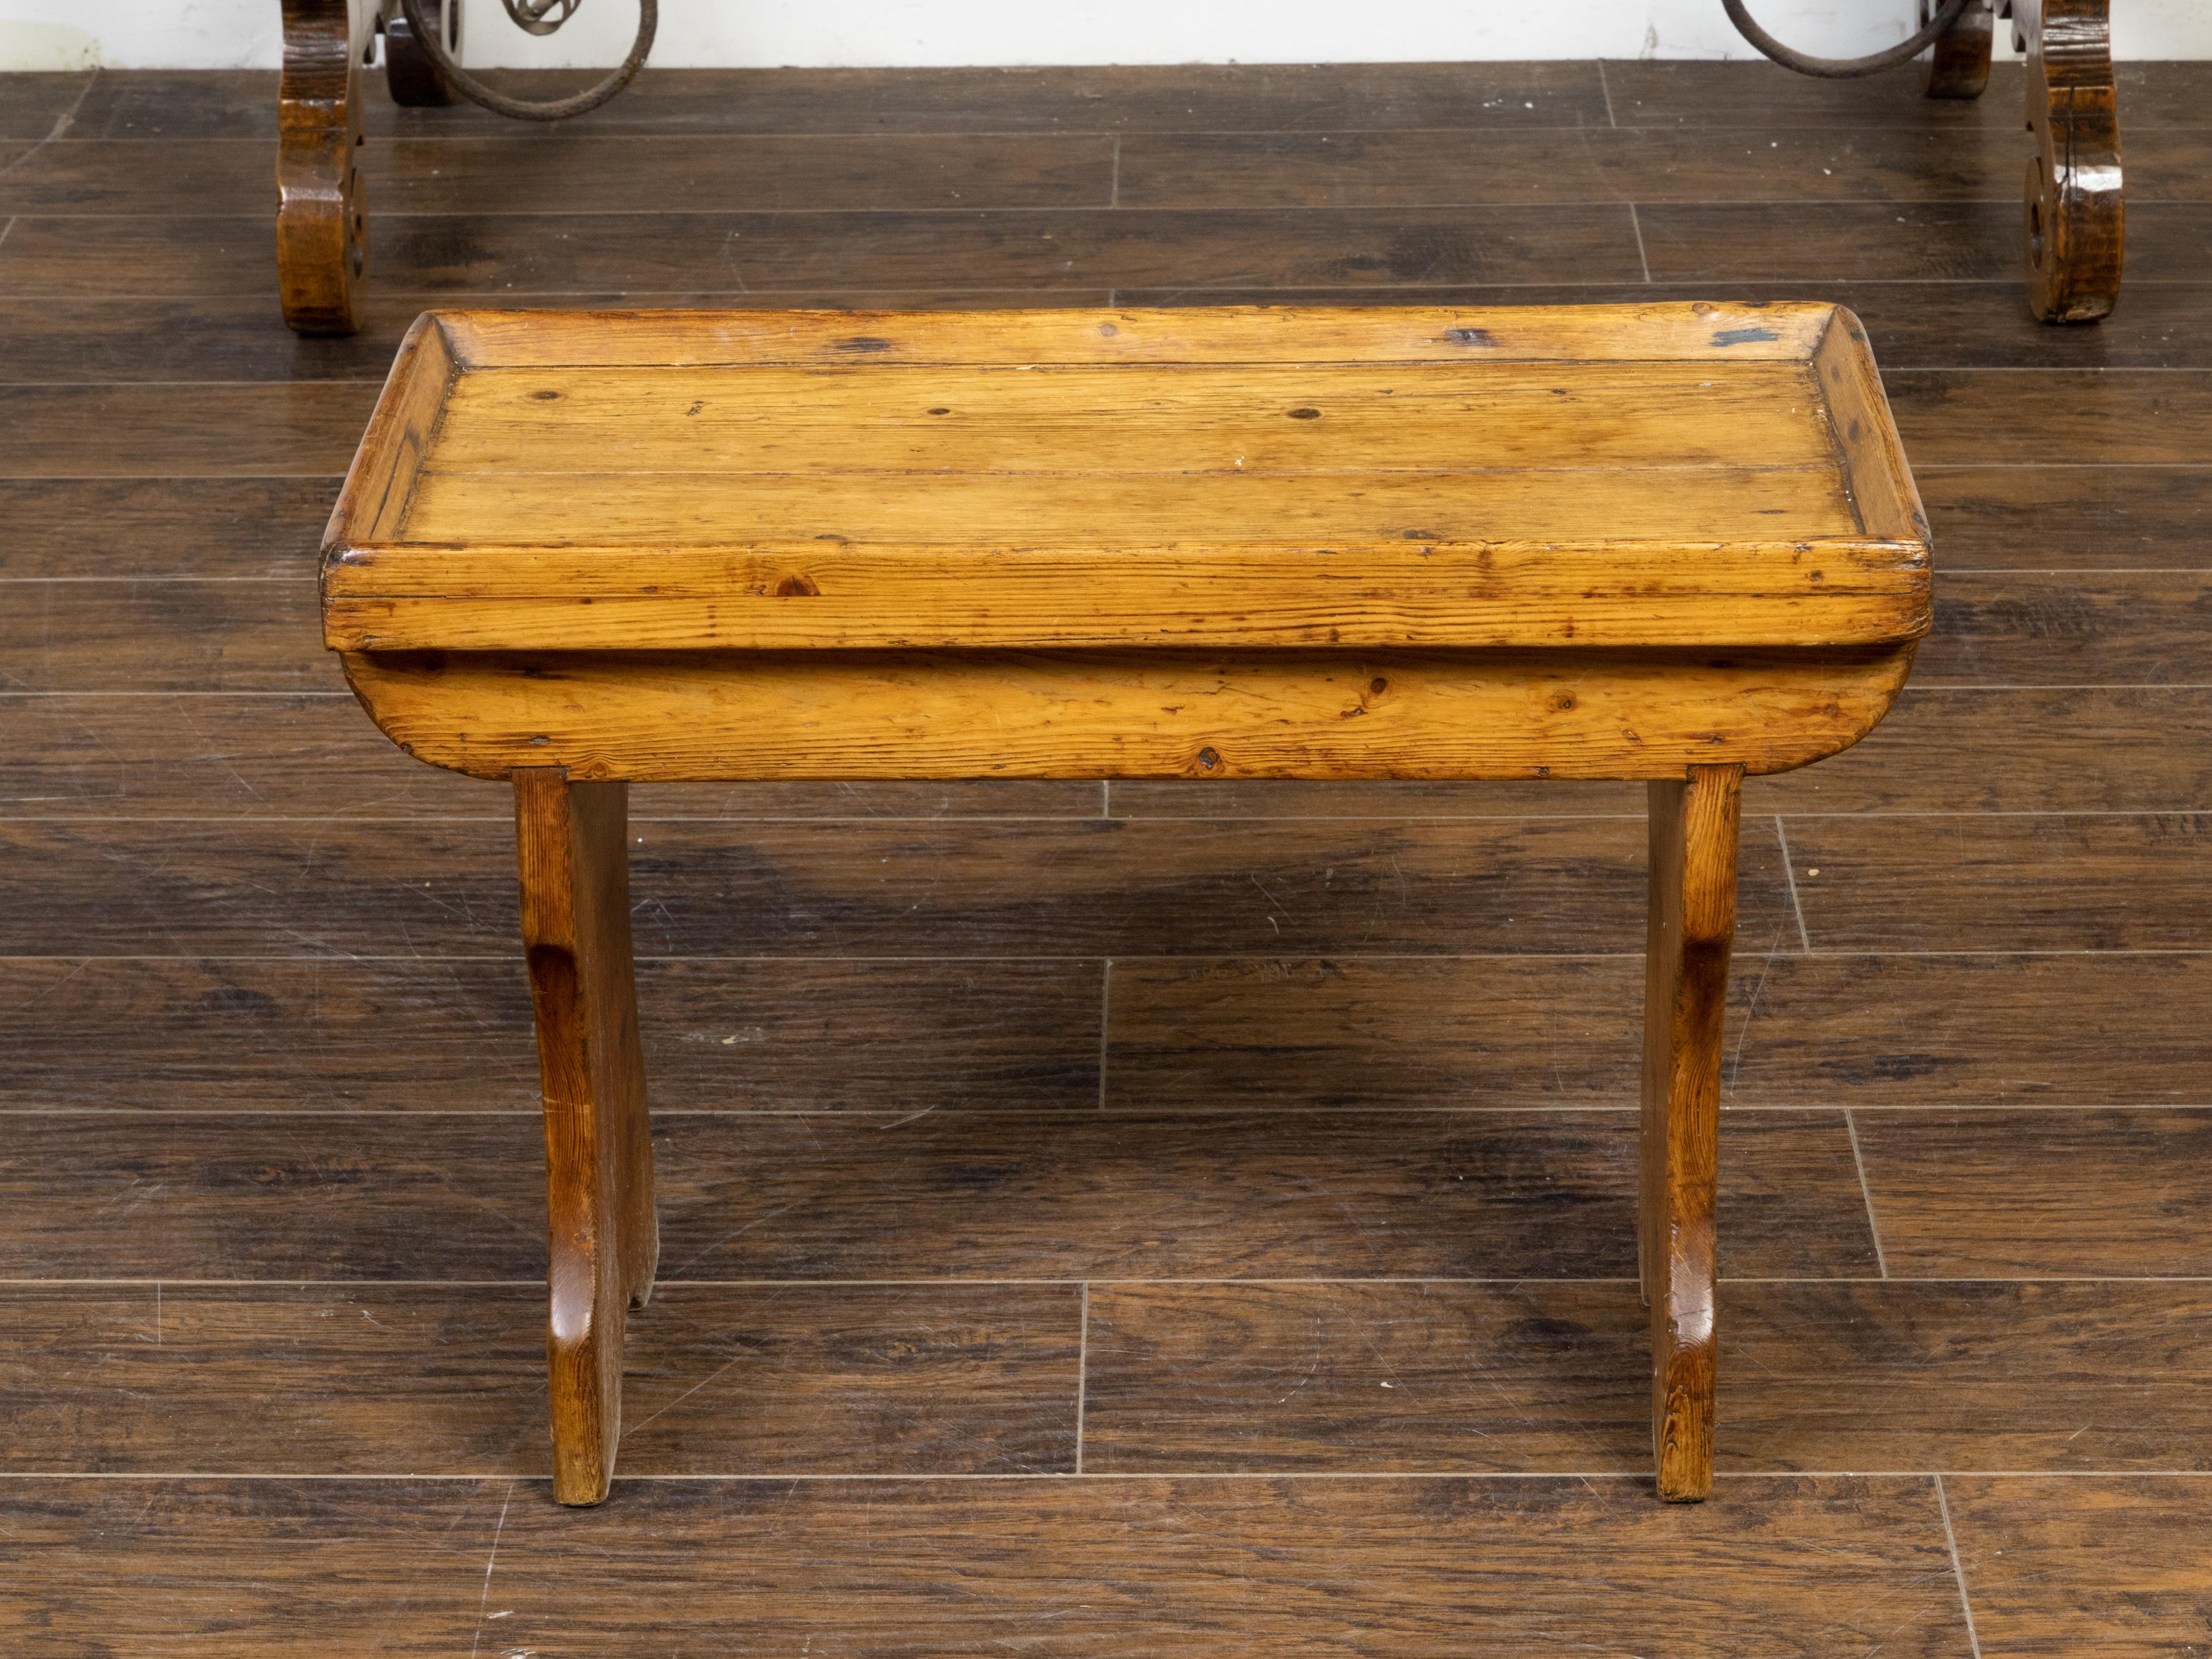 20th Century English Turn of the Century Pine Drinks Table with Tray Top and Carved Legs